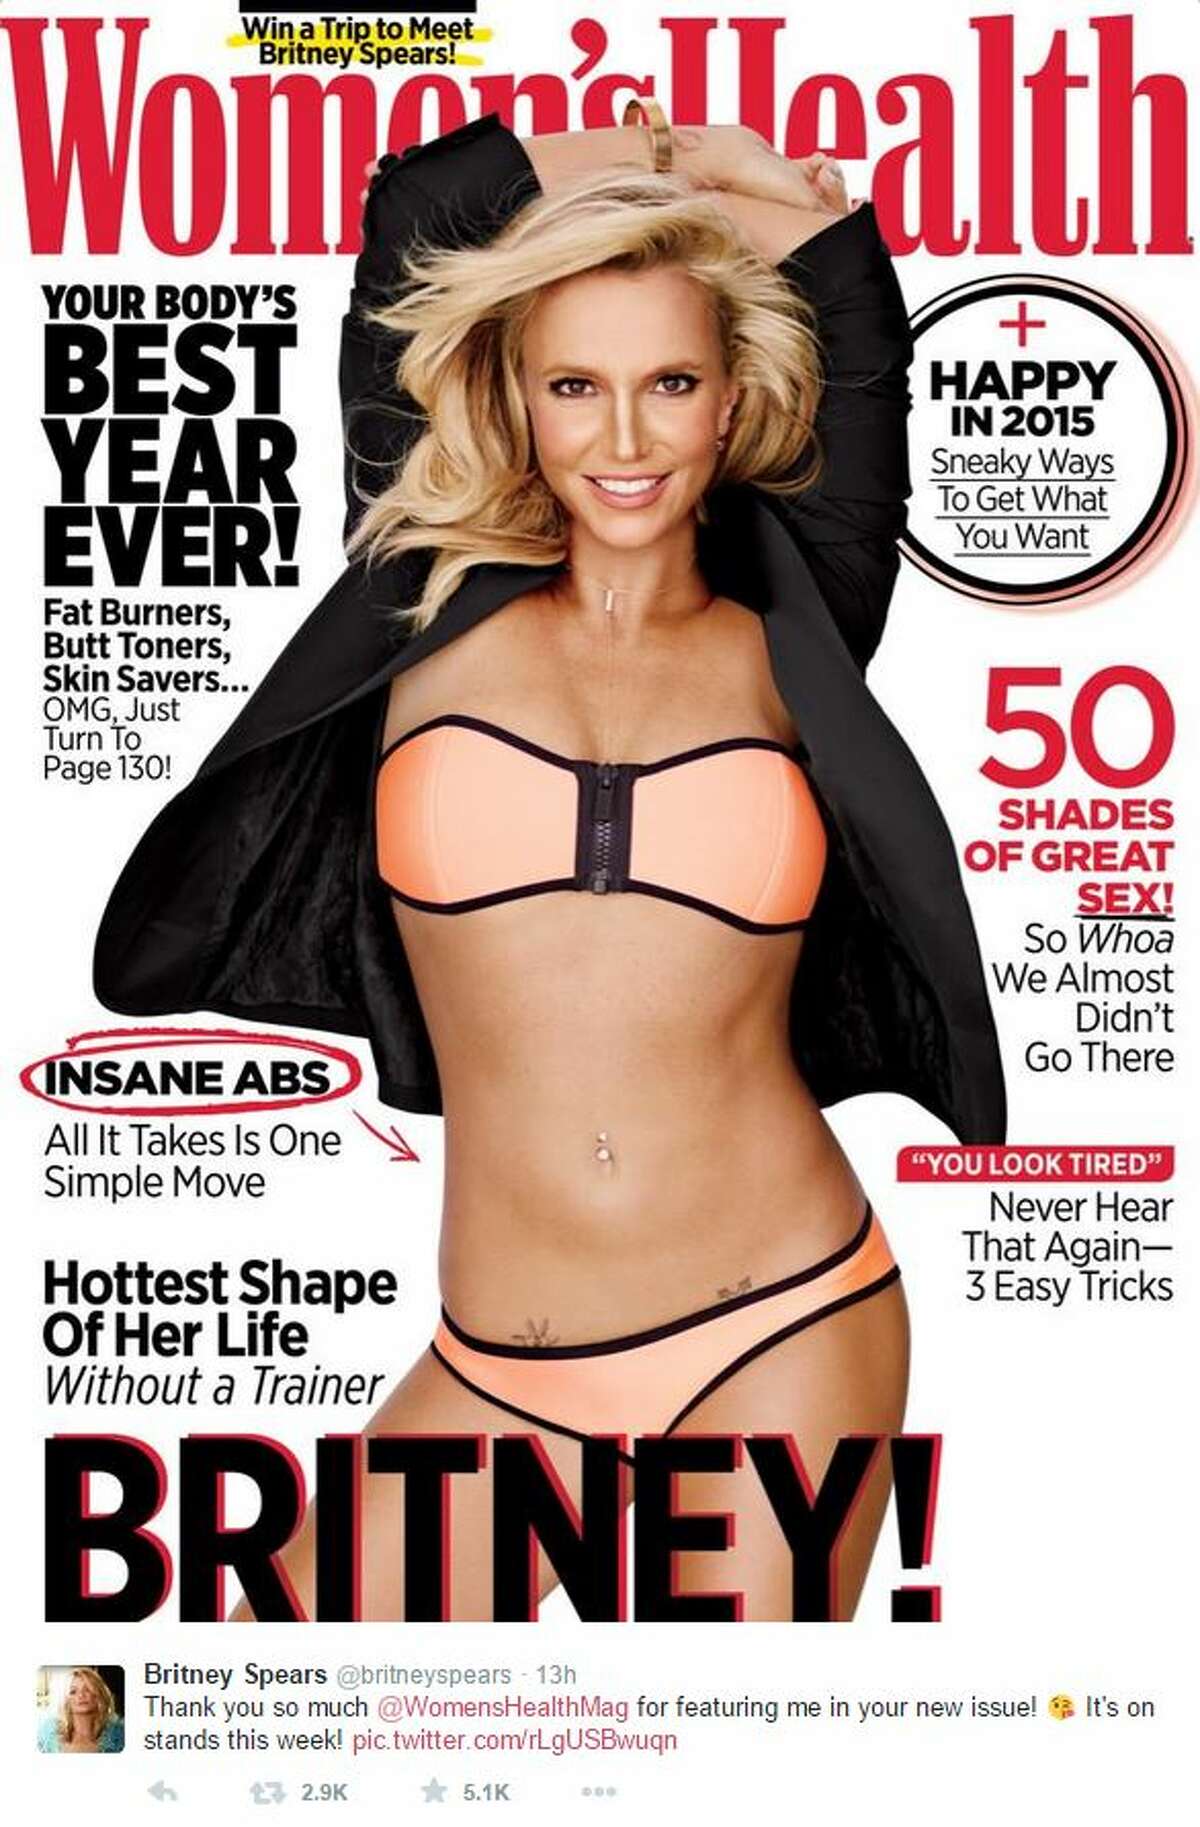 Britney Spears looks virtually unrecognizable on the cover of this month's issue of Women's Health magazine after an apparent plastic surgery procedure. The Mirror speculated the 33-year-old pop singer's shrunken nose and physique could be owed to Photoshop, whereas Buzzfeed said sassily, "We just don't know."